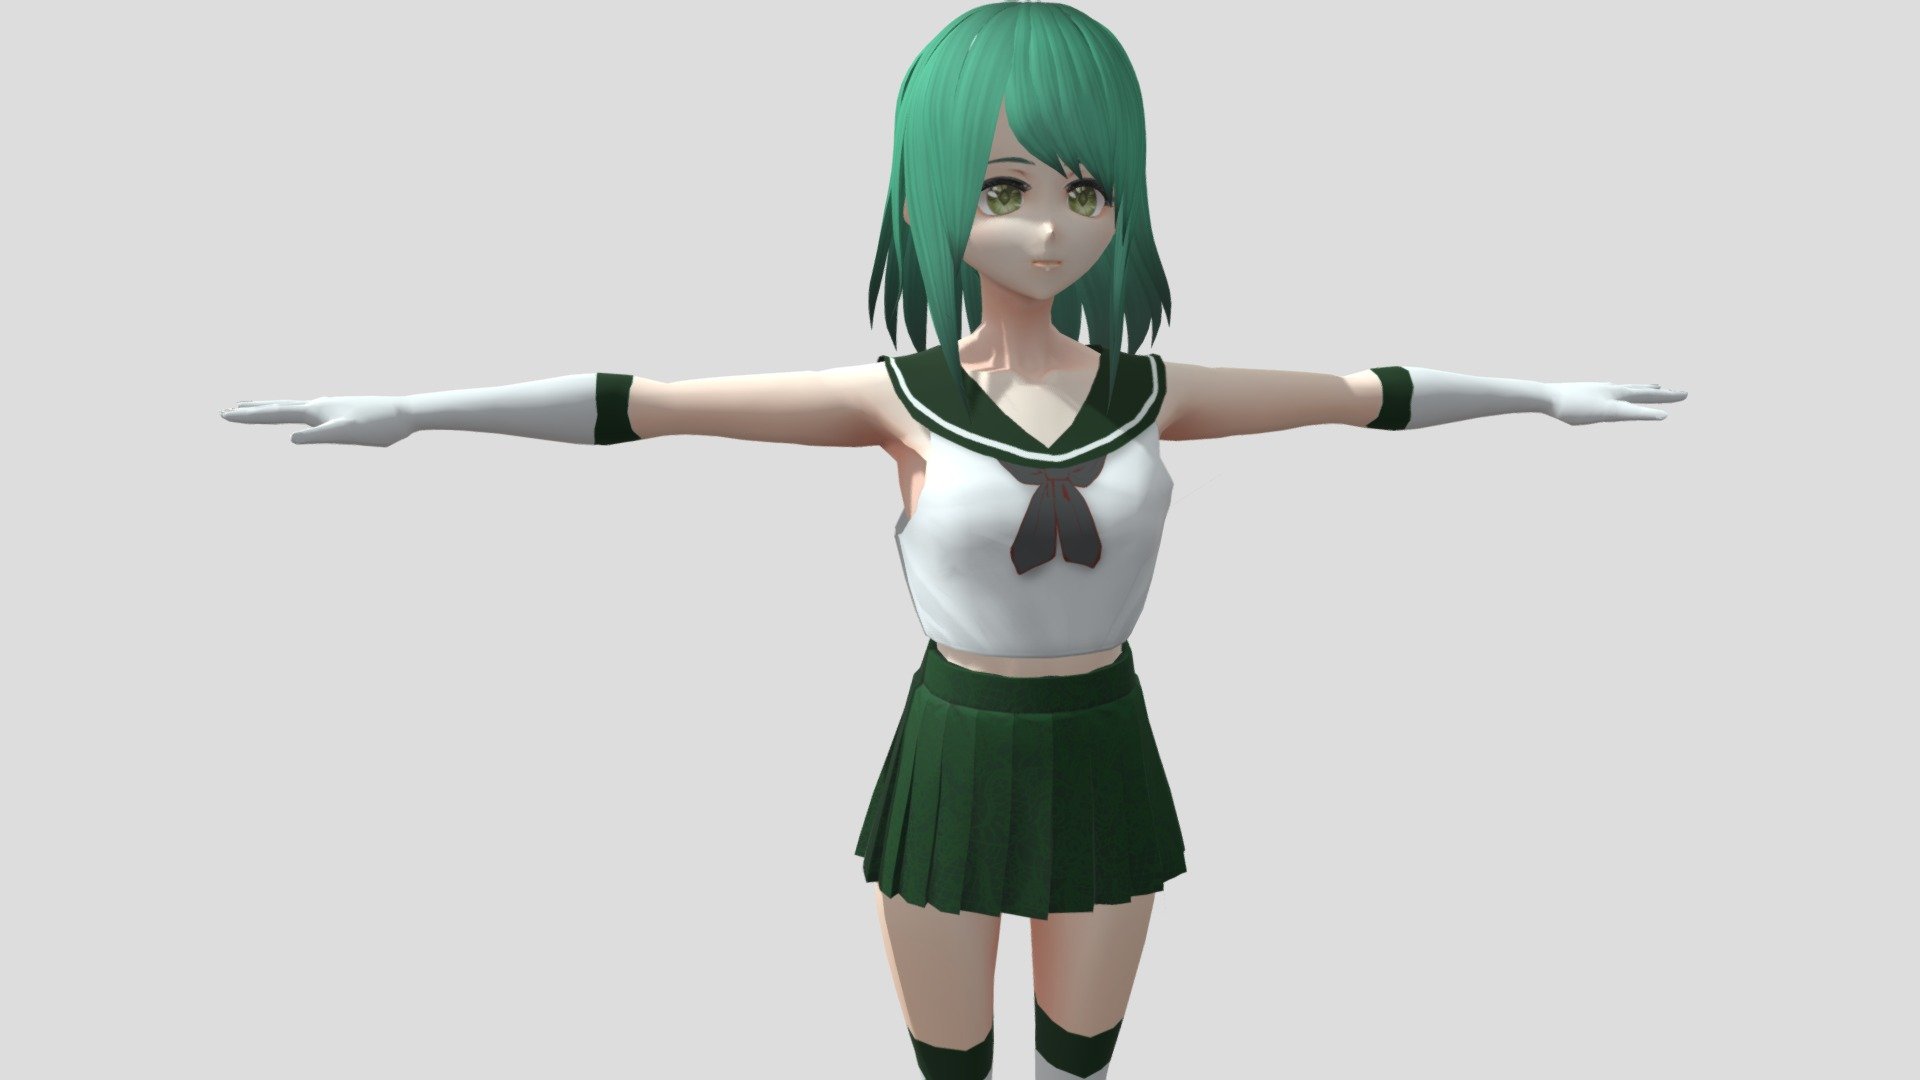 Model preview



This character model belongs to Japanese anime style, all models has been converted into fbx file using blender, users can add their favorite animations on mixamo website, then apply to unity versions above 2019



Character : Youko

Verts:16209

Tris:23122

Fifteen textures for the character



This package contains VRM files, which can make the character module more refined, please refer to the manual for details



▶Commercial use allowed

▶Forbid secondary sales



Welcome add my website to credit :

Sketchfab

Pixiv

VRoidHub
 - 【Anime Character / alex94i60】Youko (Sailor) - Buy Royalty Free 3D model by 3D動漫風角色屋 / 3D Anime Character Store (@alex94i60) 3d model